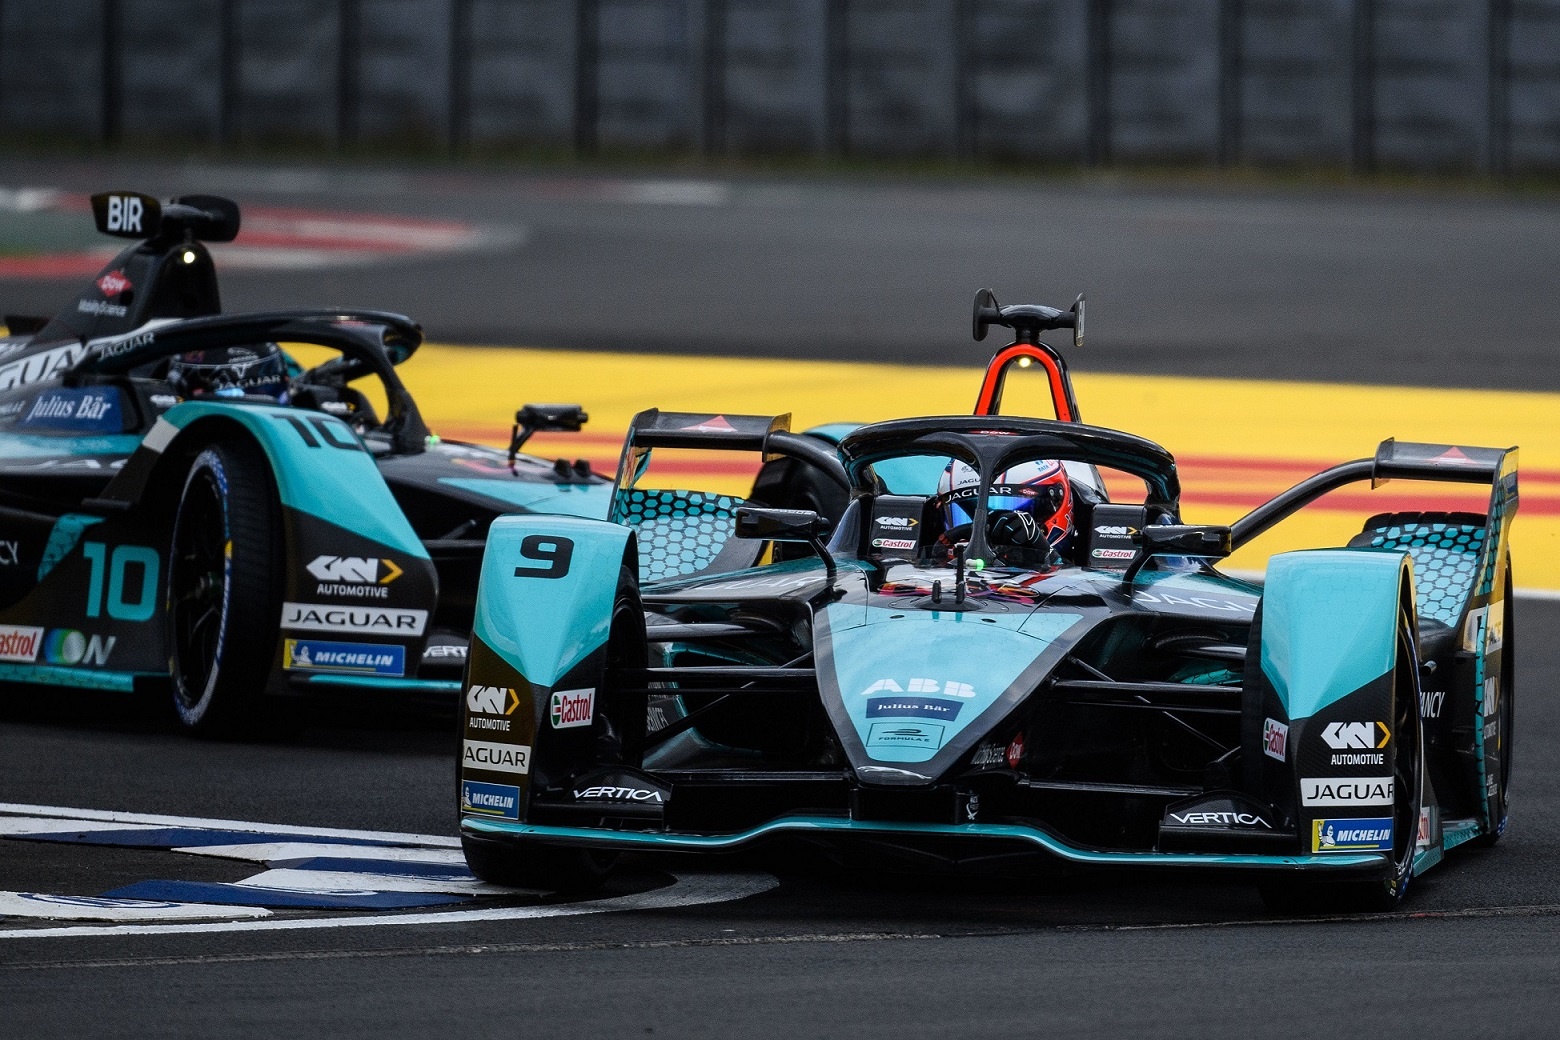 Jaguar Tcs Racing Frustrated After Scoring No Points In Mexico City